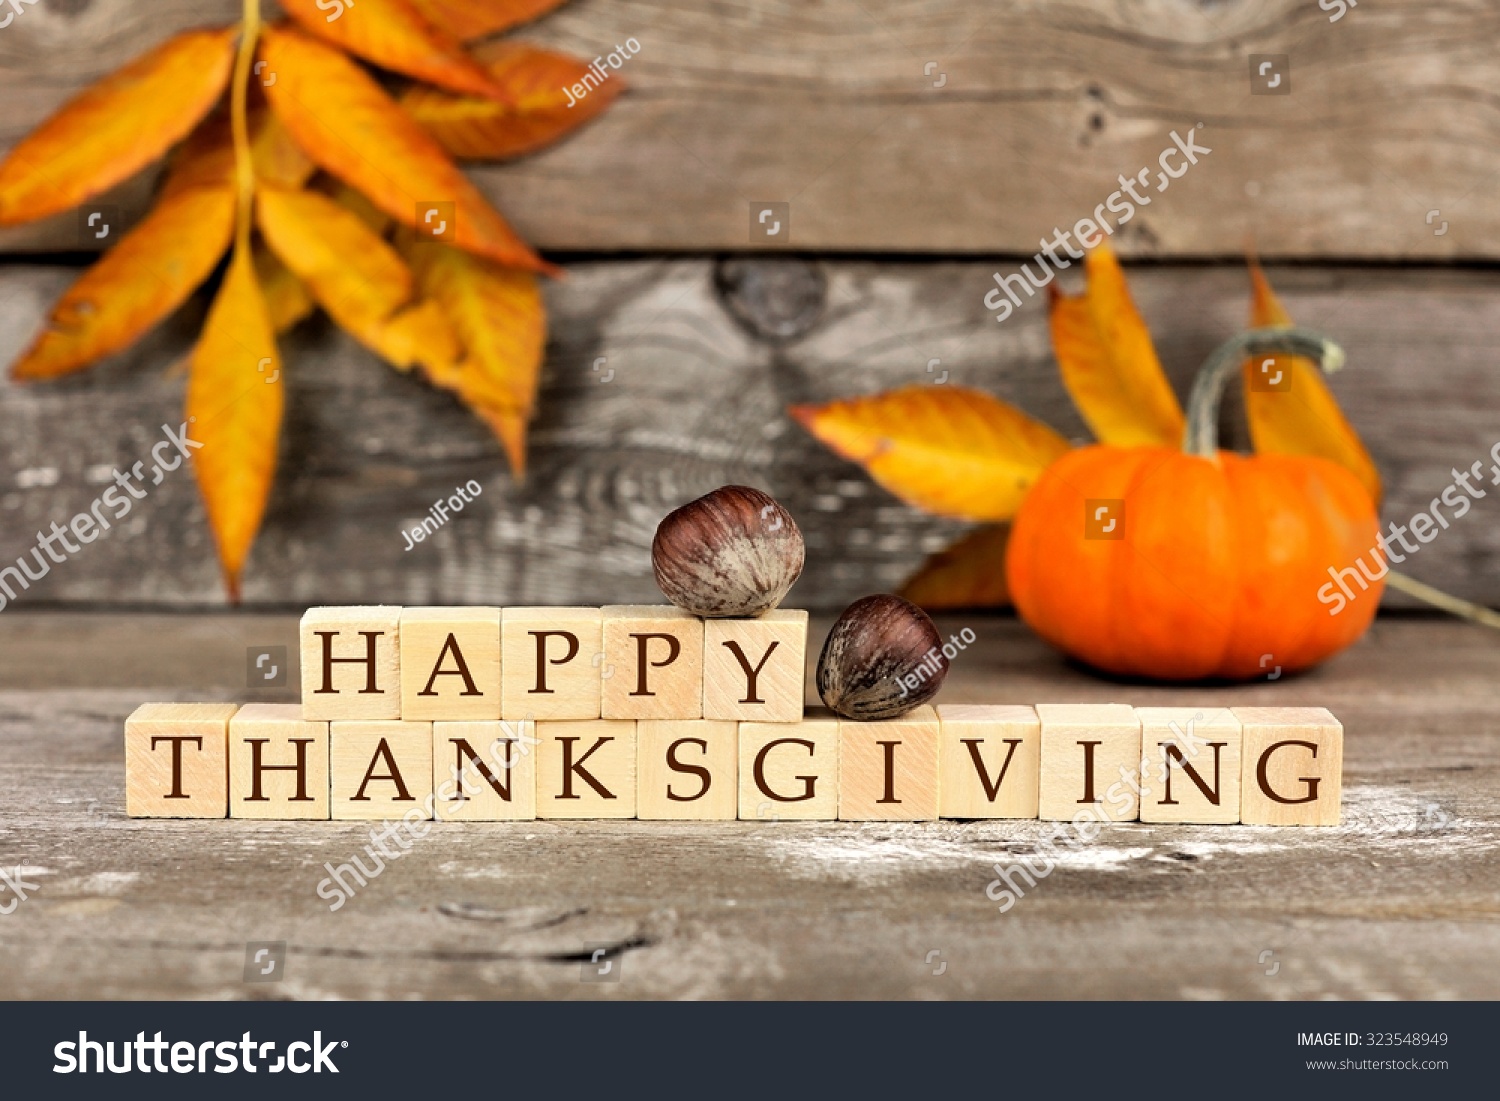 Happy Thanksgiving wooden blocks against a rustic wood background with pumpkins and autumn leaves #323548949